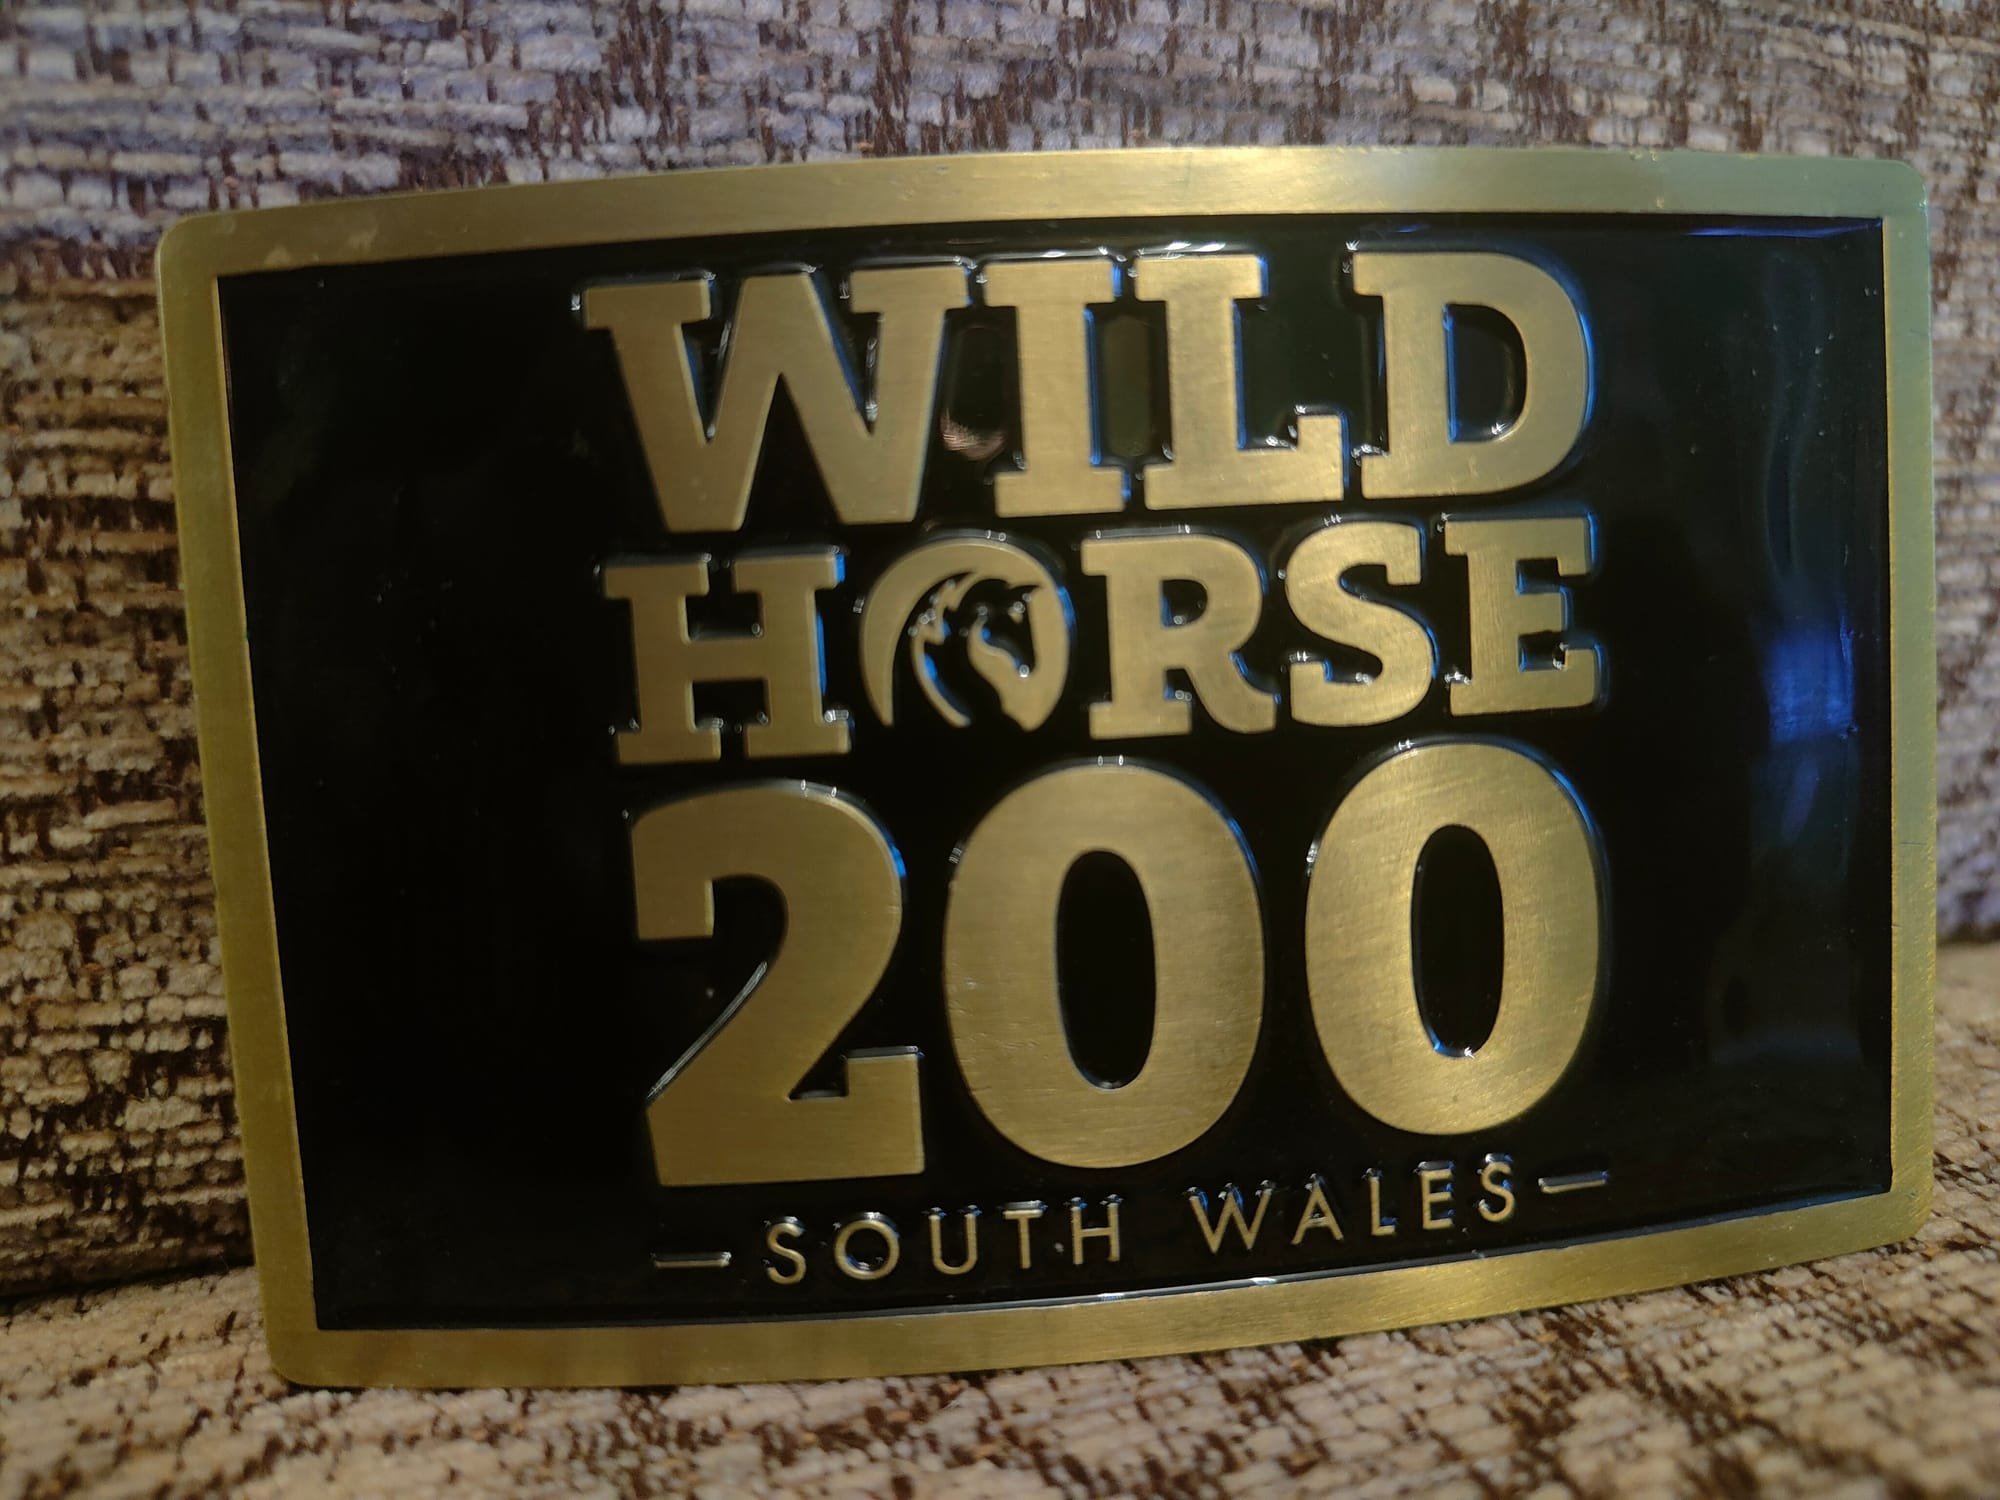 Wildhorse South Wales 200 - More than just fitness